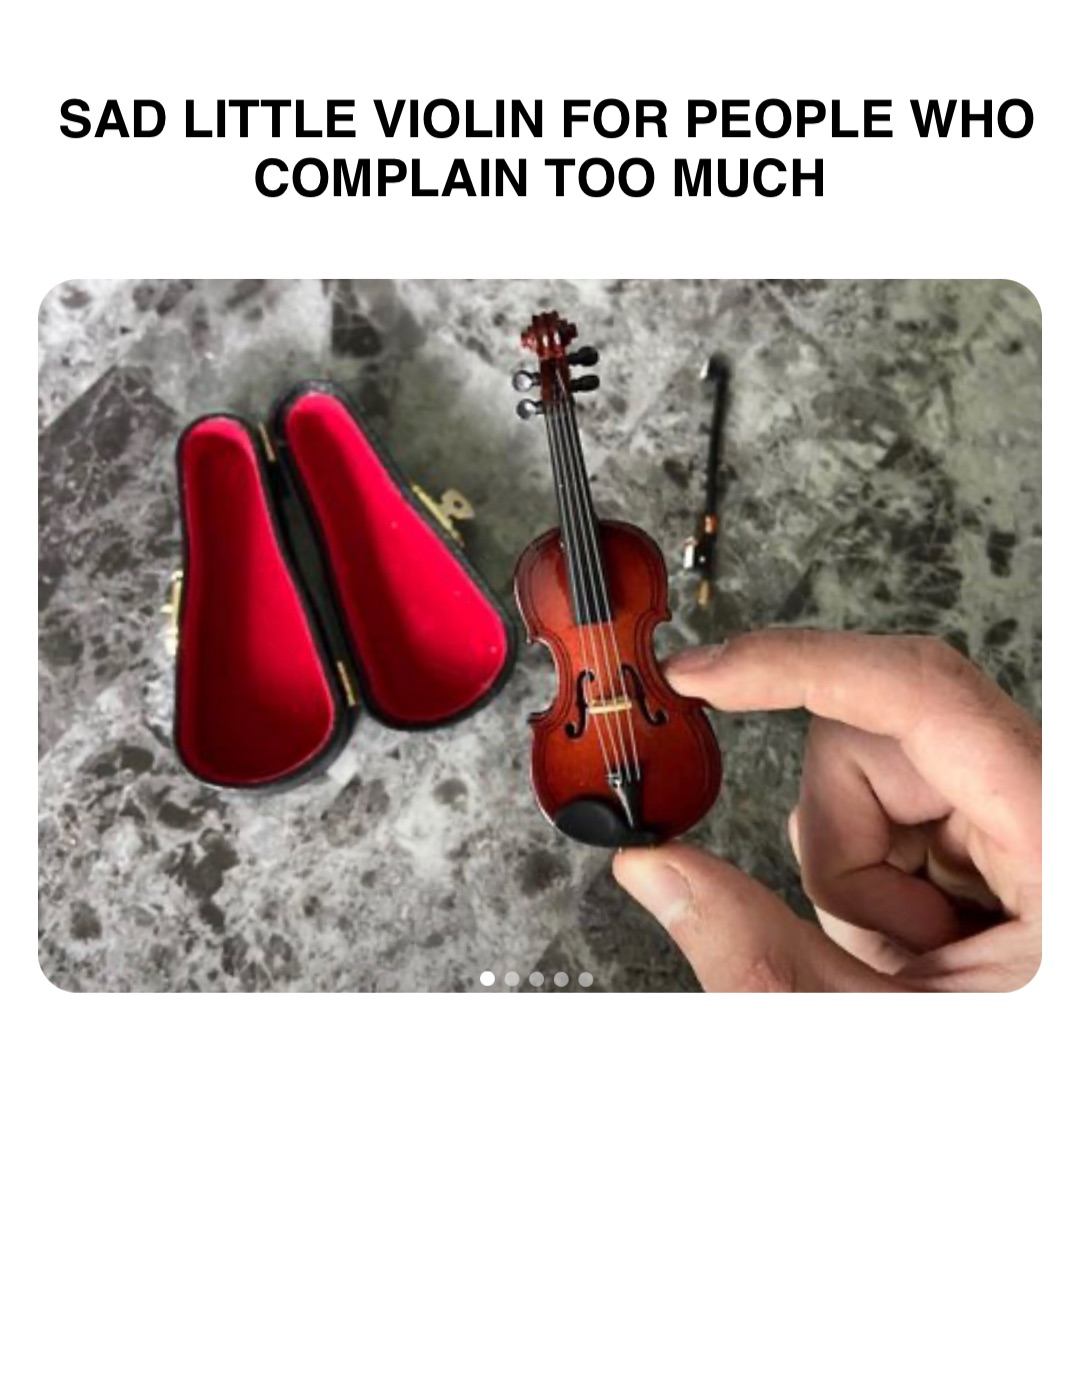 Sad little violin for people who complain too much